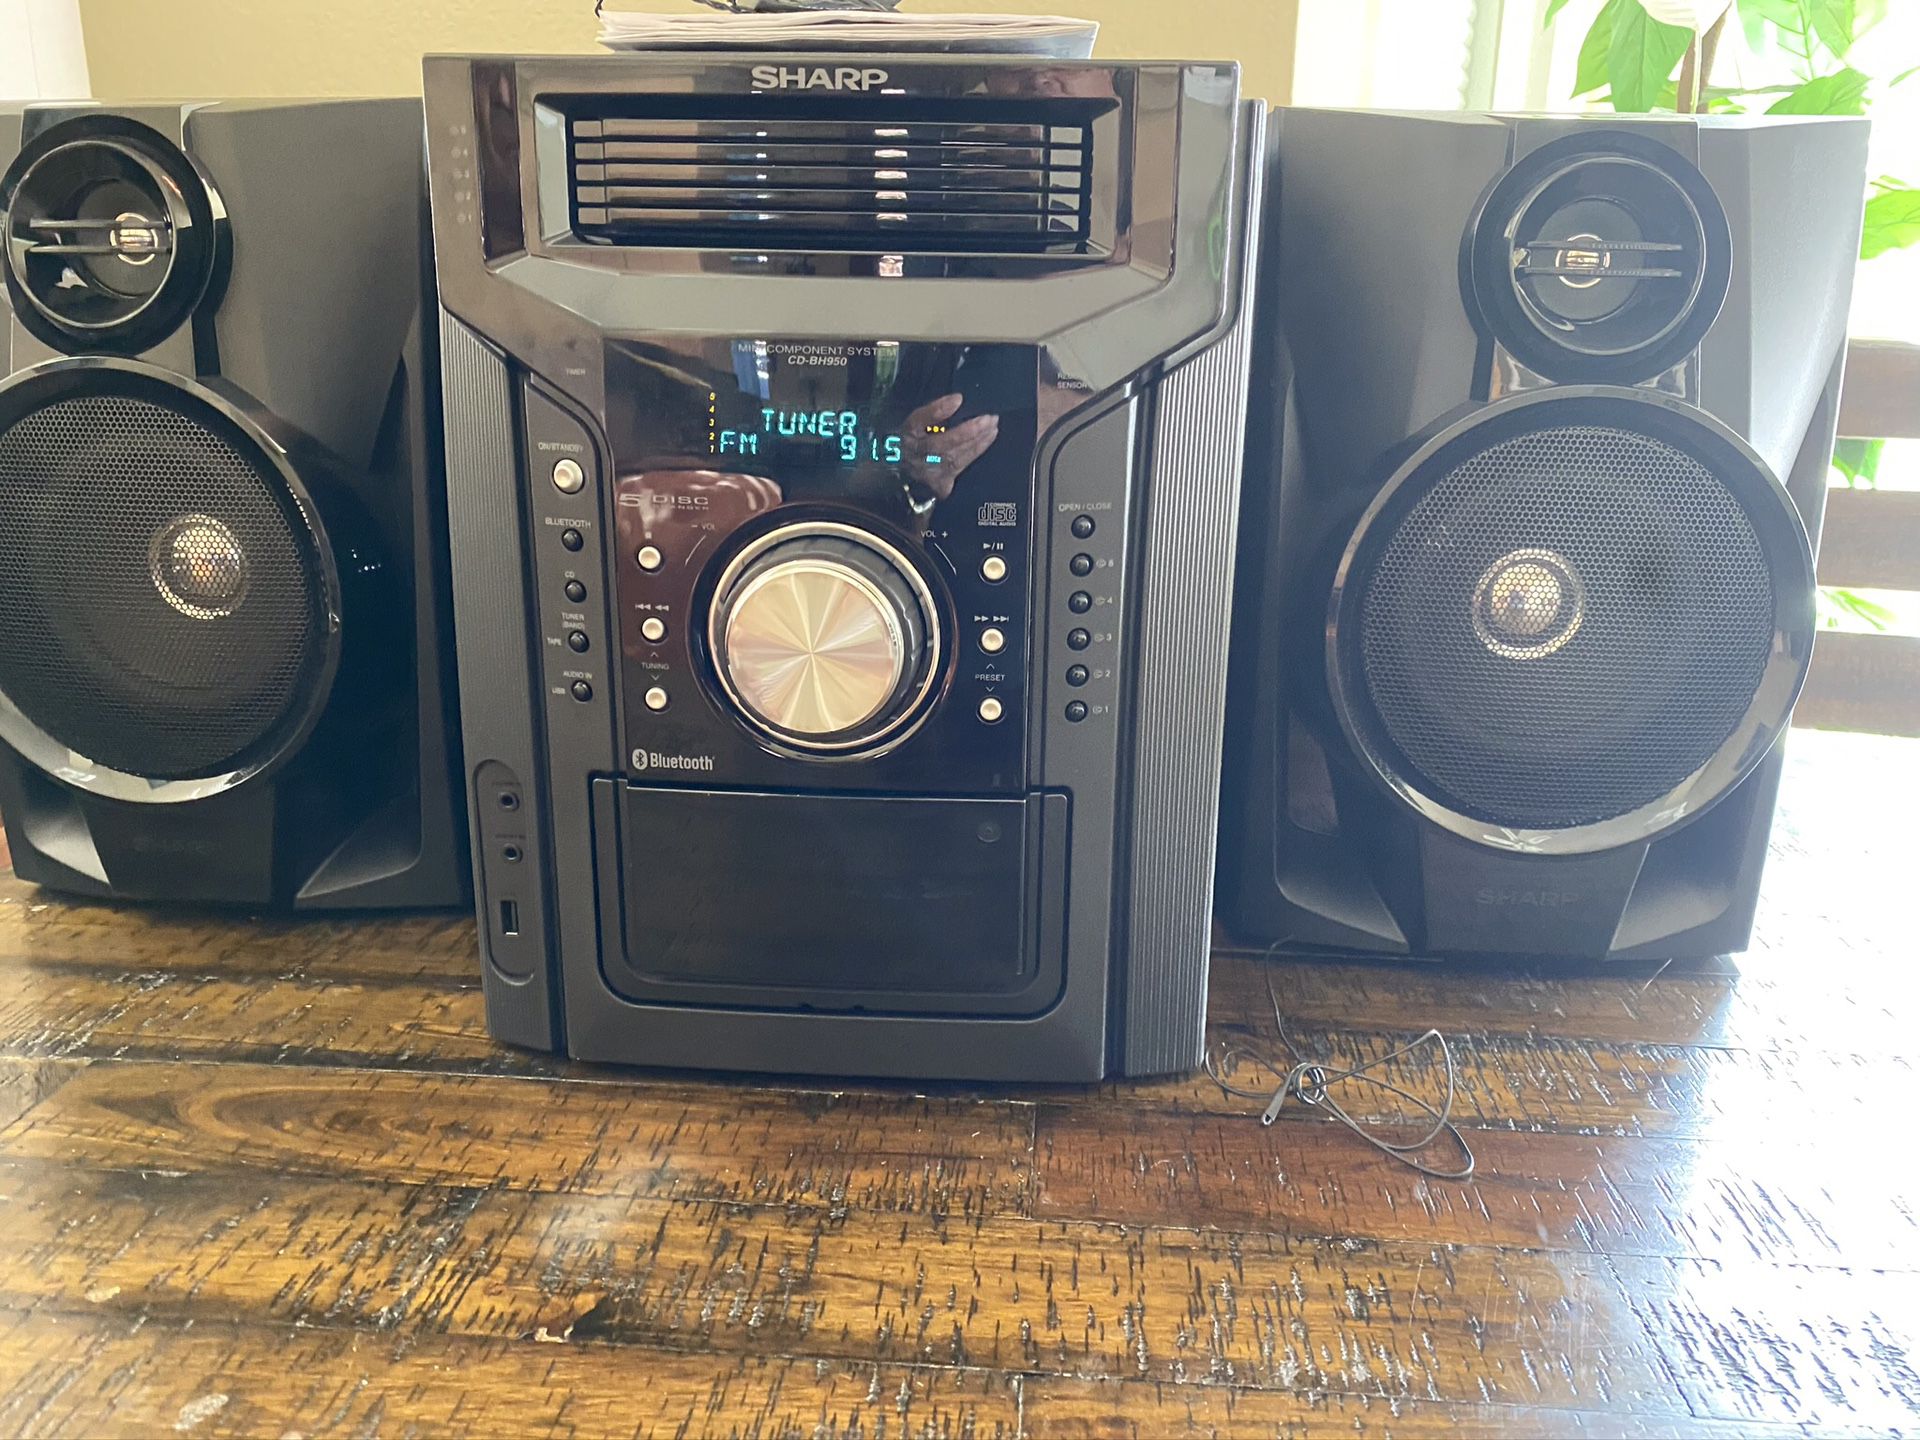 Sharp 240watts 5 disc mini shelf audio stereo system cassette Bluetooth AM/FM with remote in excellent working condition barley used